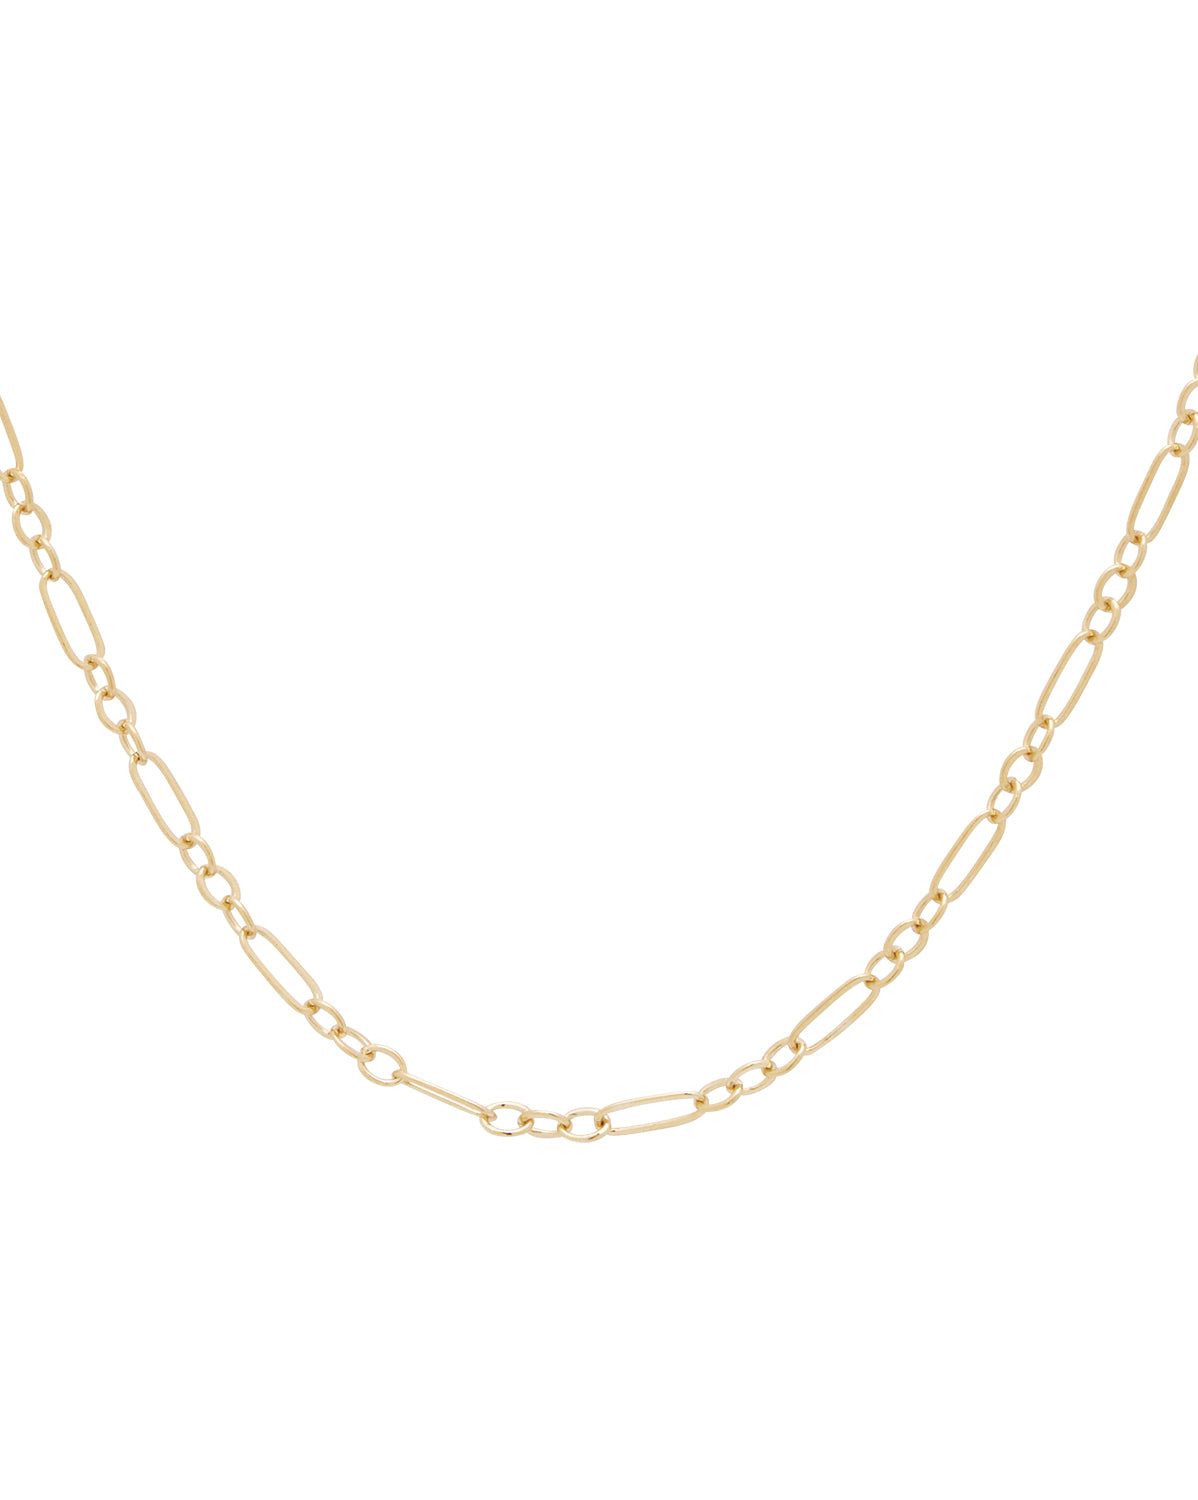 14K Solid Gold Rosalita Necklace